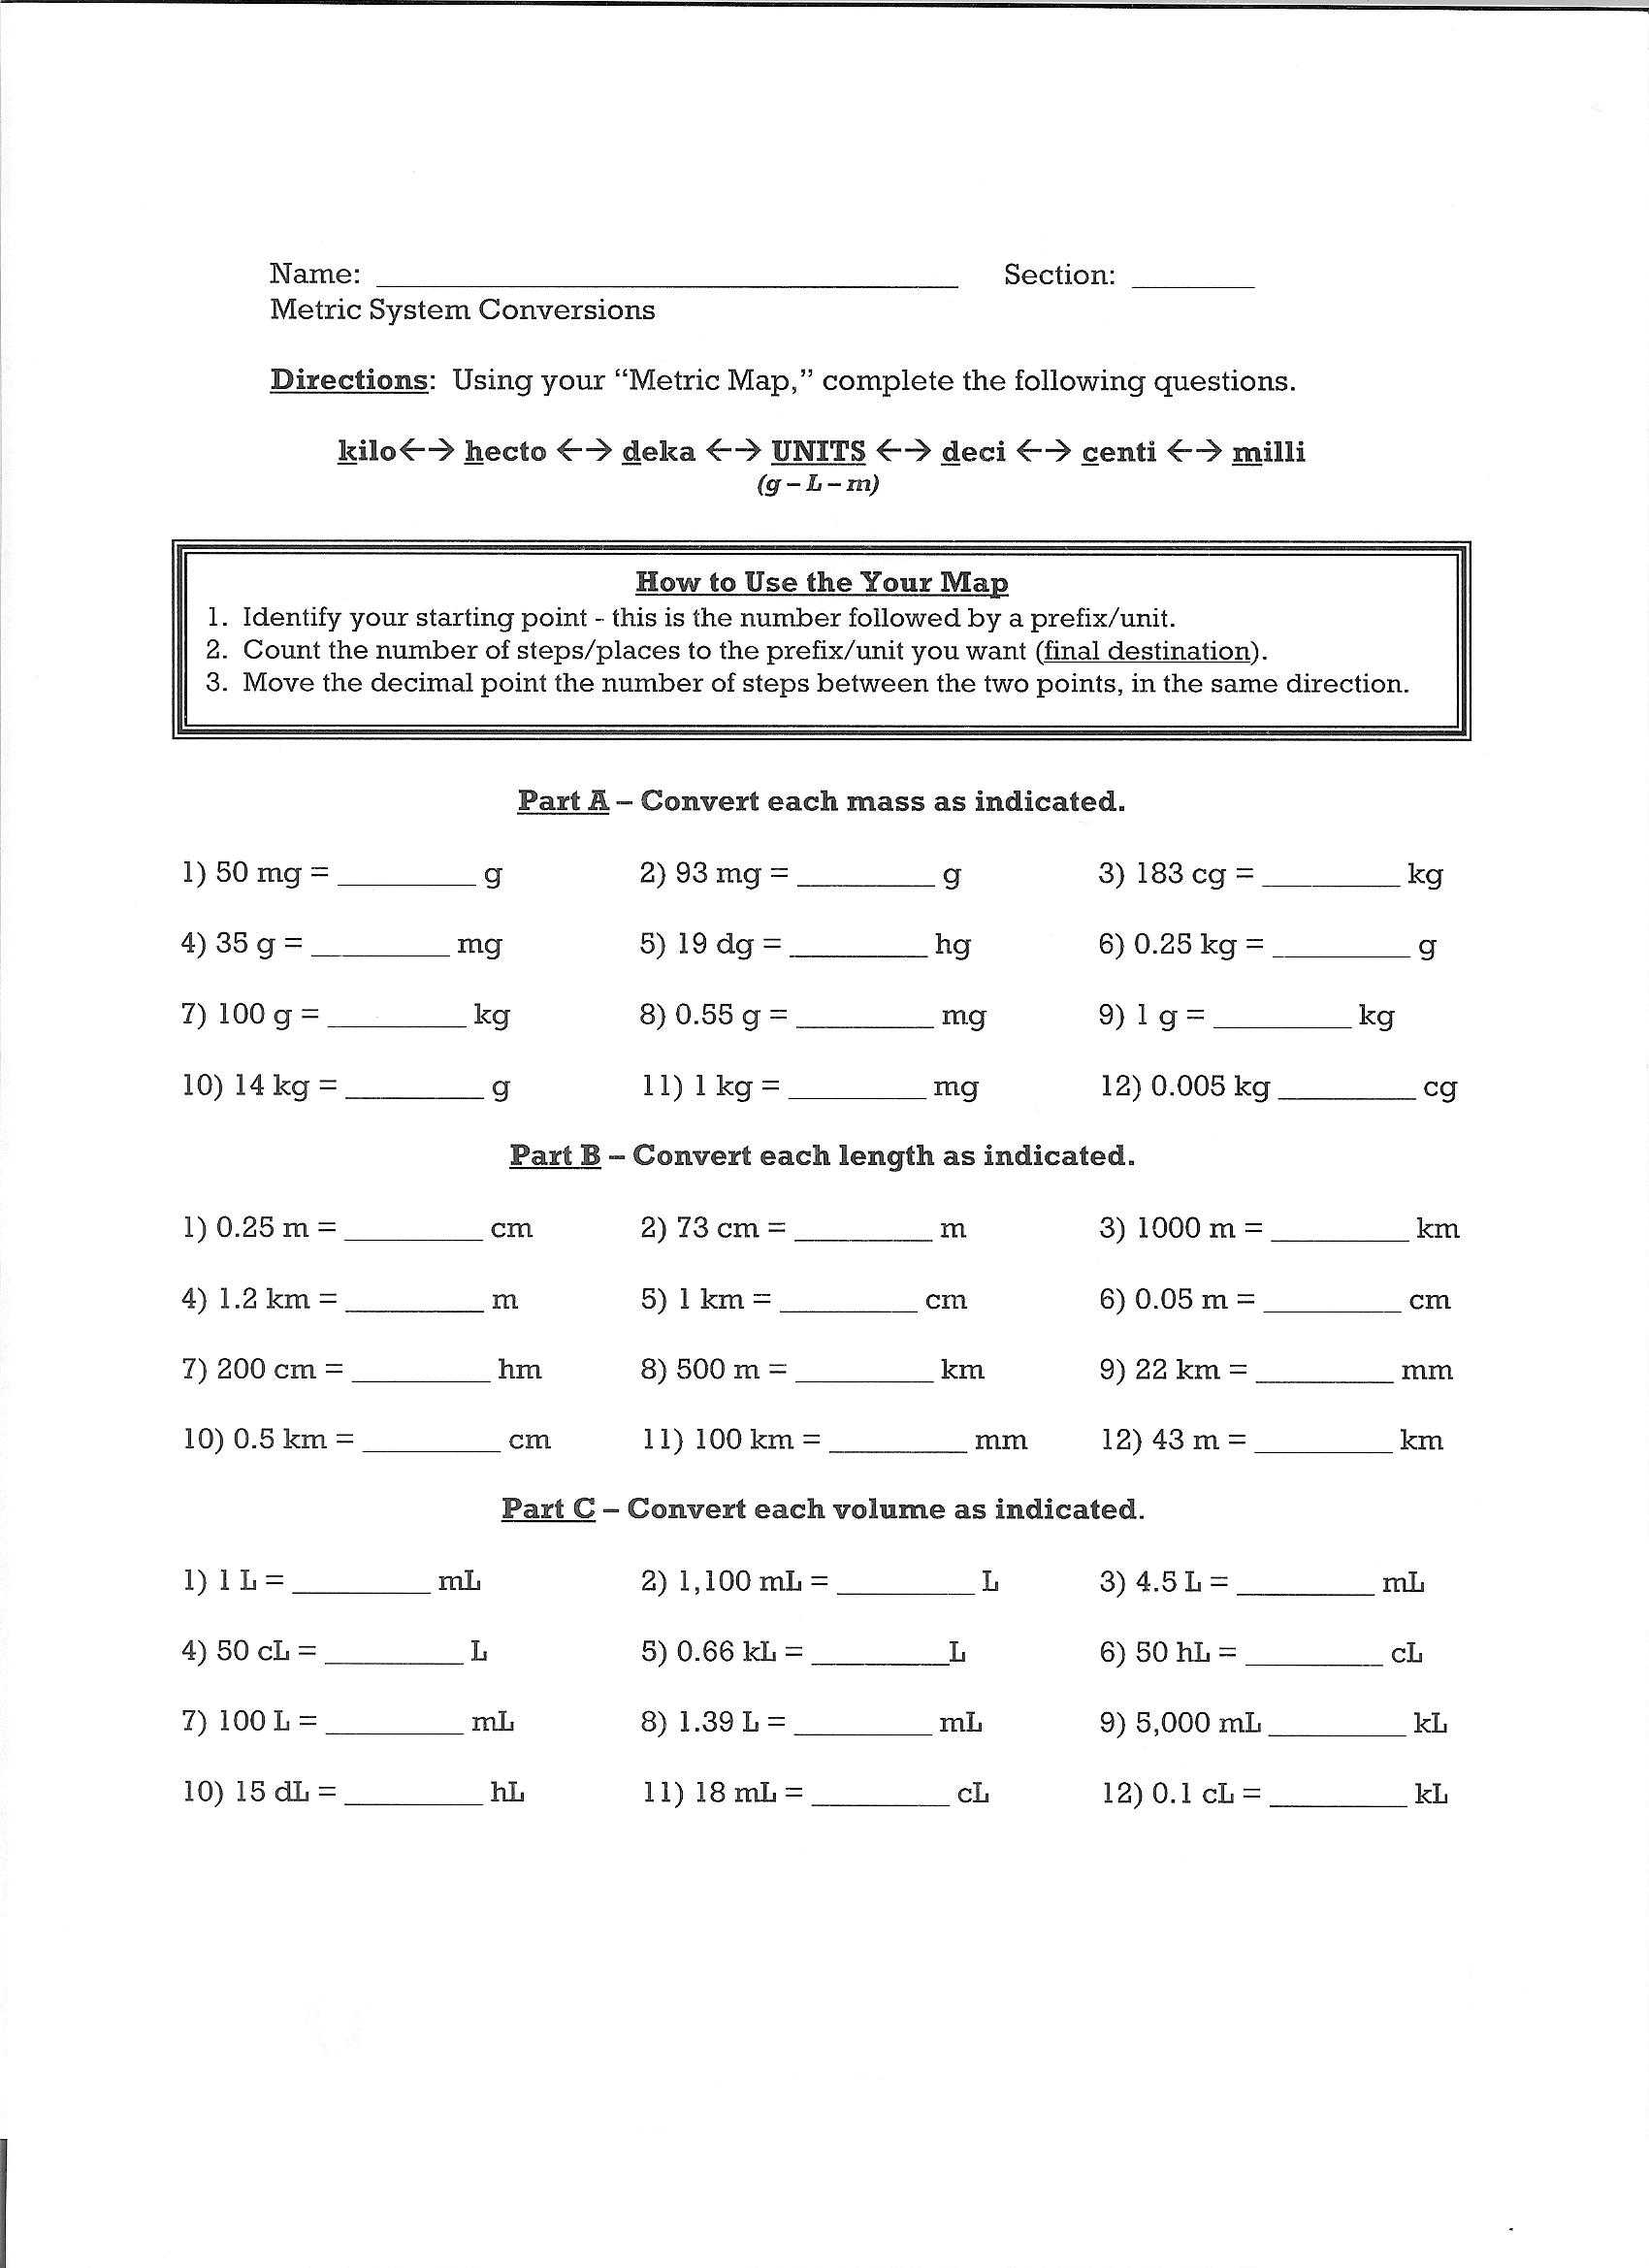 Solar System Worksheets Middle School with Metric System Worksheet Middle School the Best Worksheets Image